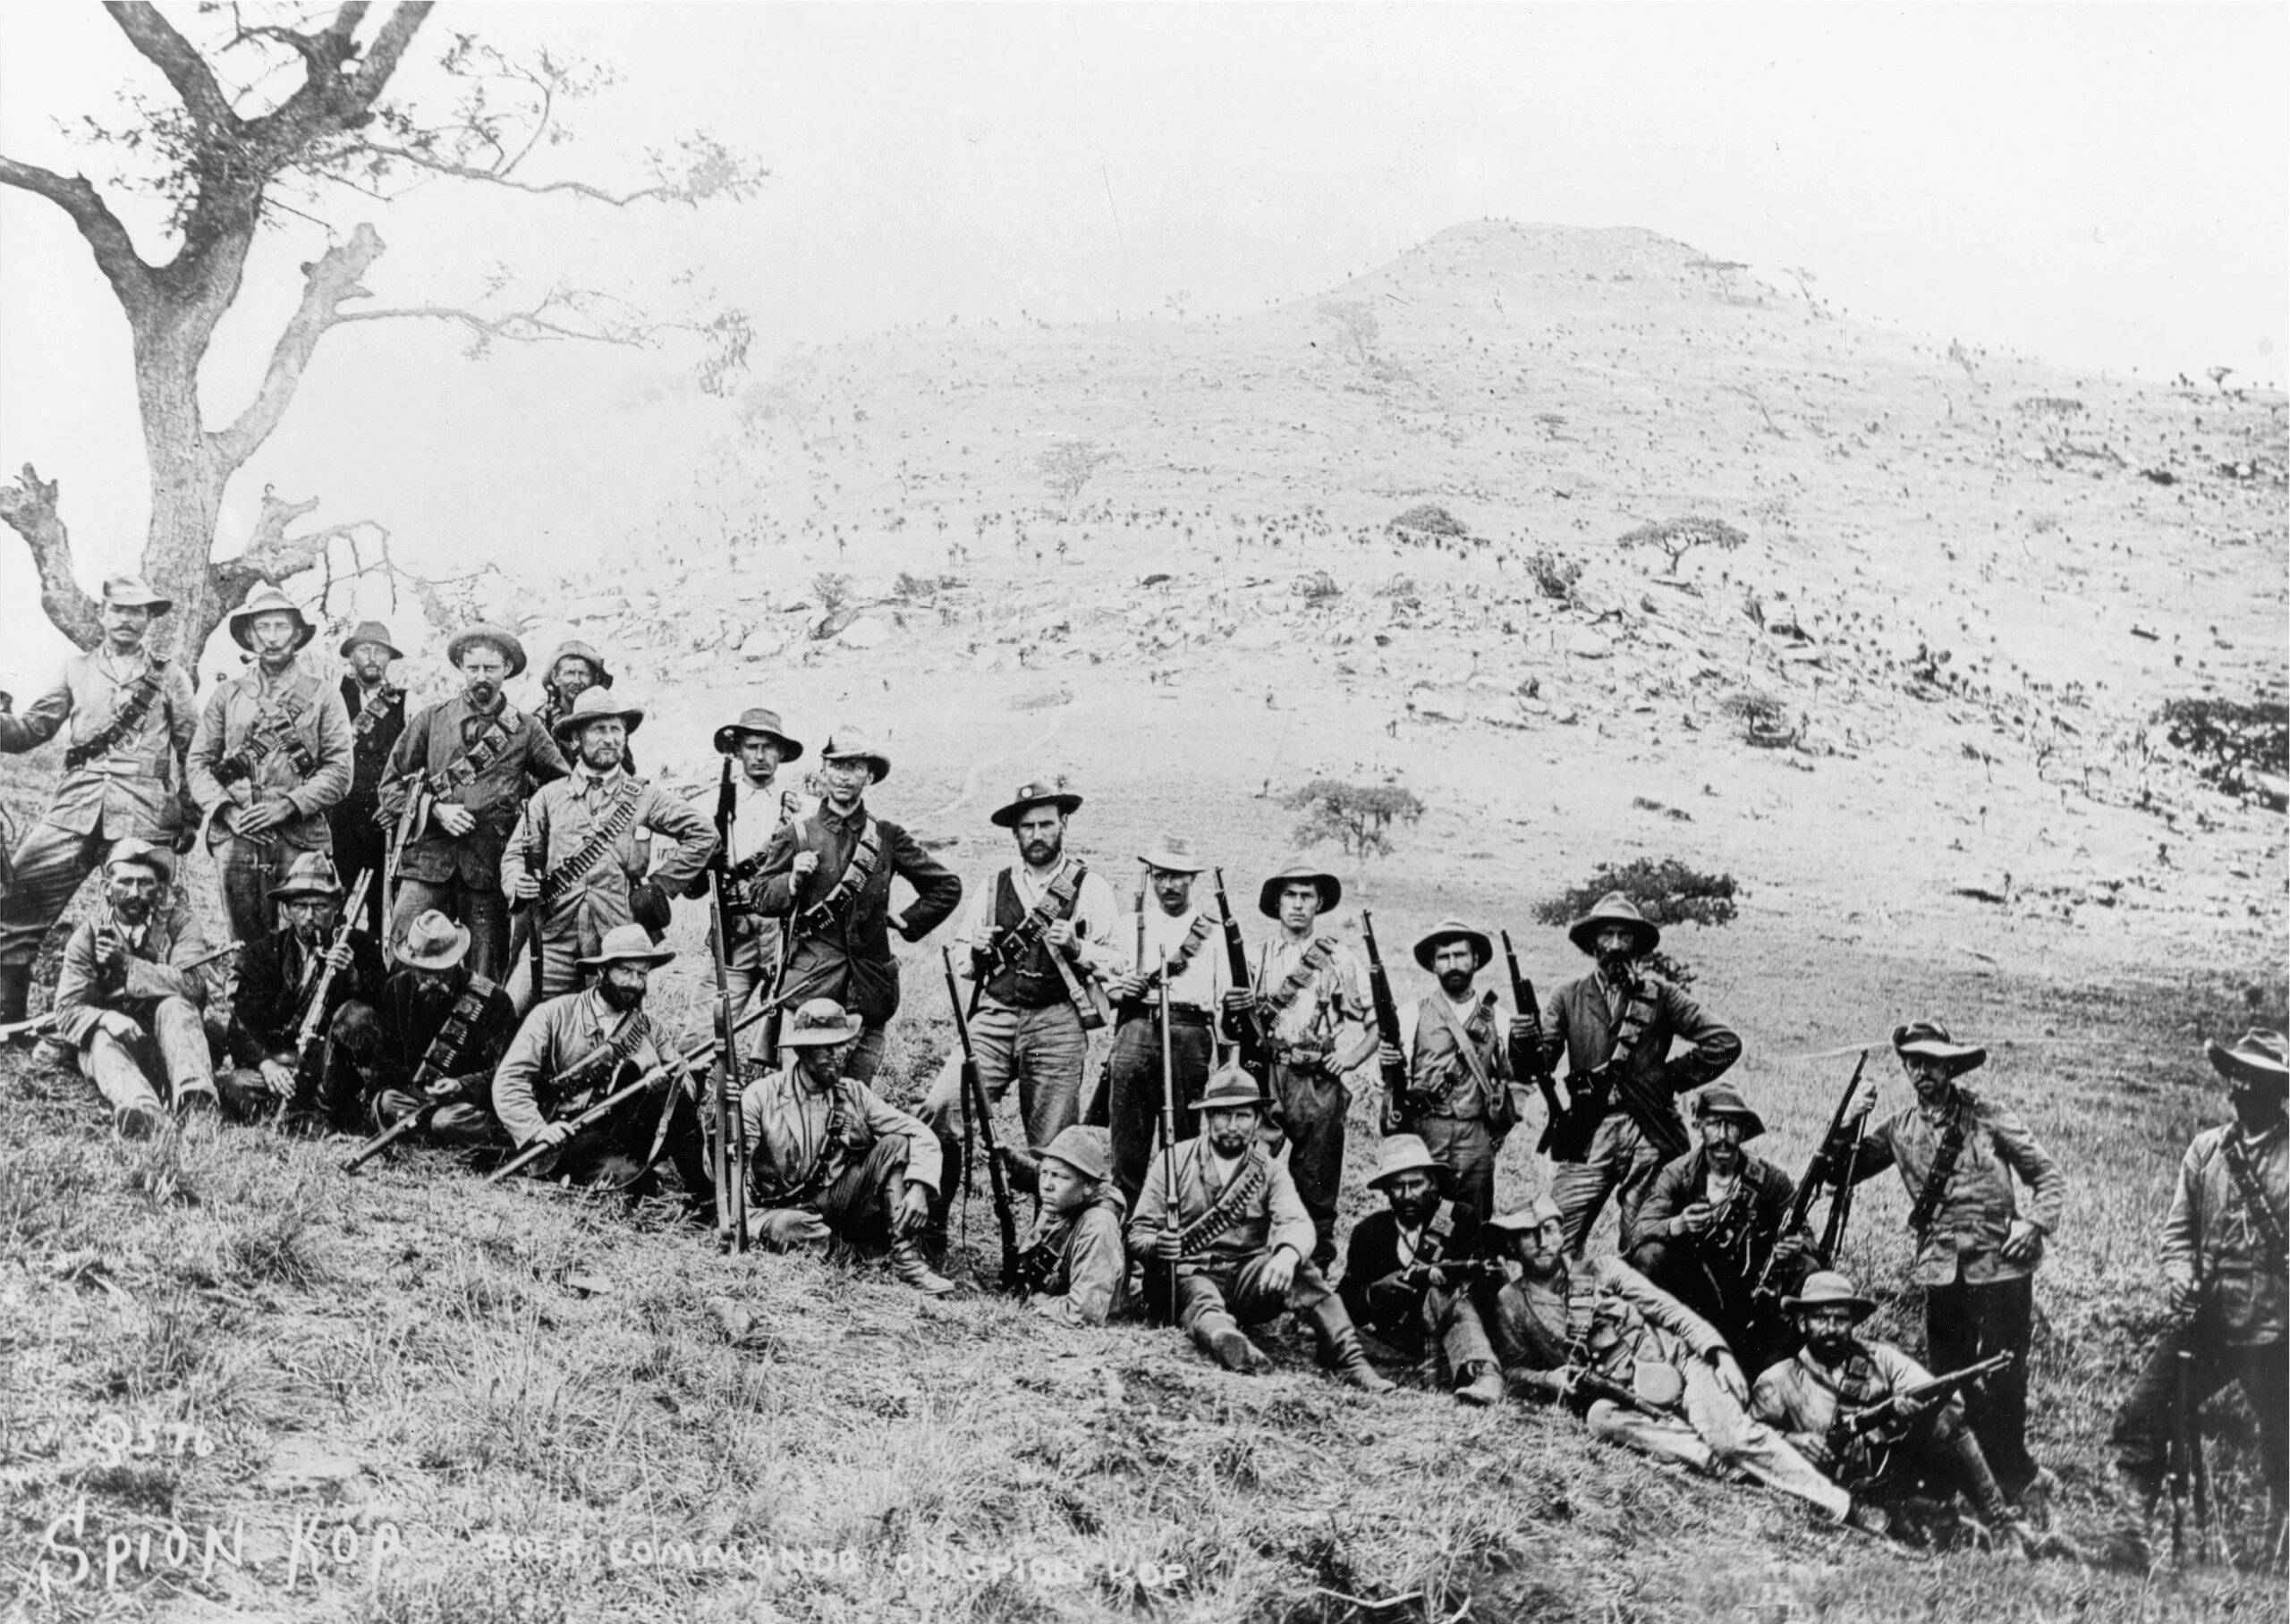 A Boer commando unit poses for a photo in front of Spion Kop. Aside from being skilled fighters, they also had an intimate knowledge of the South African terrain.